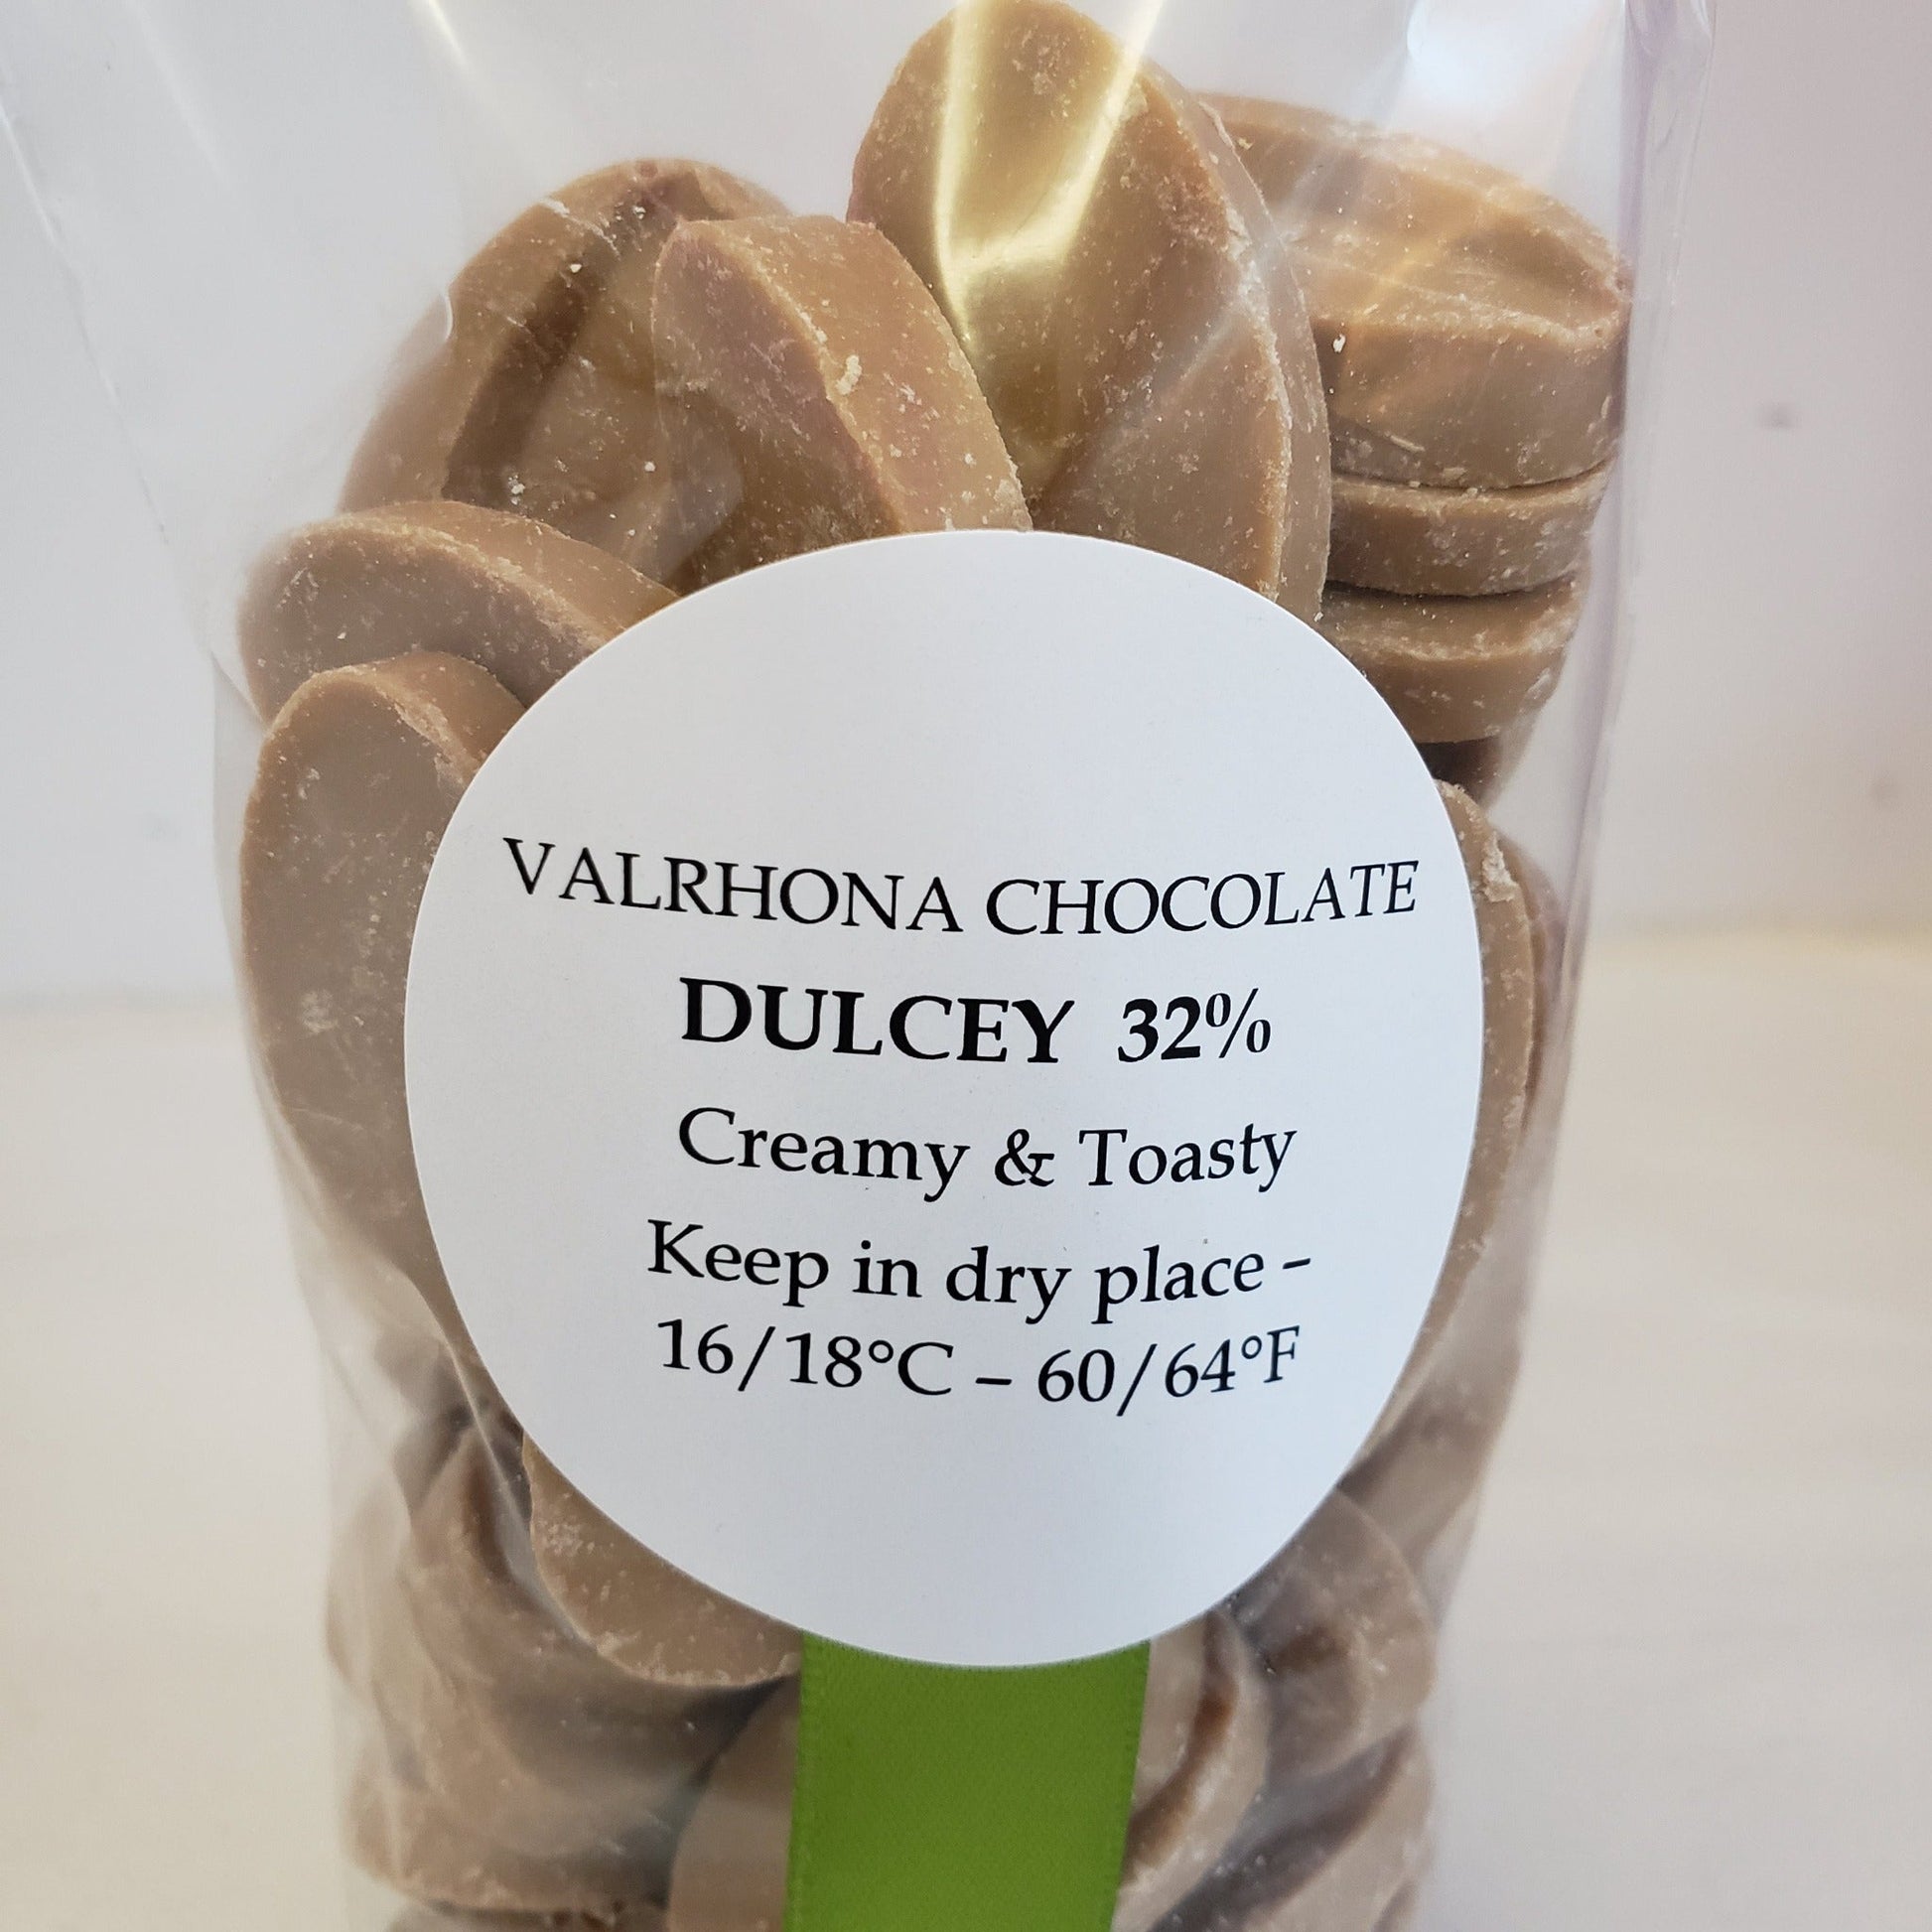 Dulcey, 32% creamy & toasty.   Smooth, creamy chocolate with a velvety and enveloping texture & a warm, blond color. The first notes are buttery, toasty & not too sweet, gradually giving way to the flavours of shortbread with a pinch of salt. 